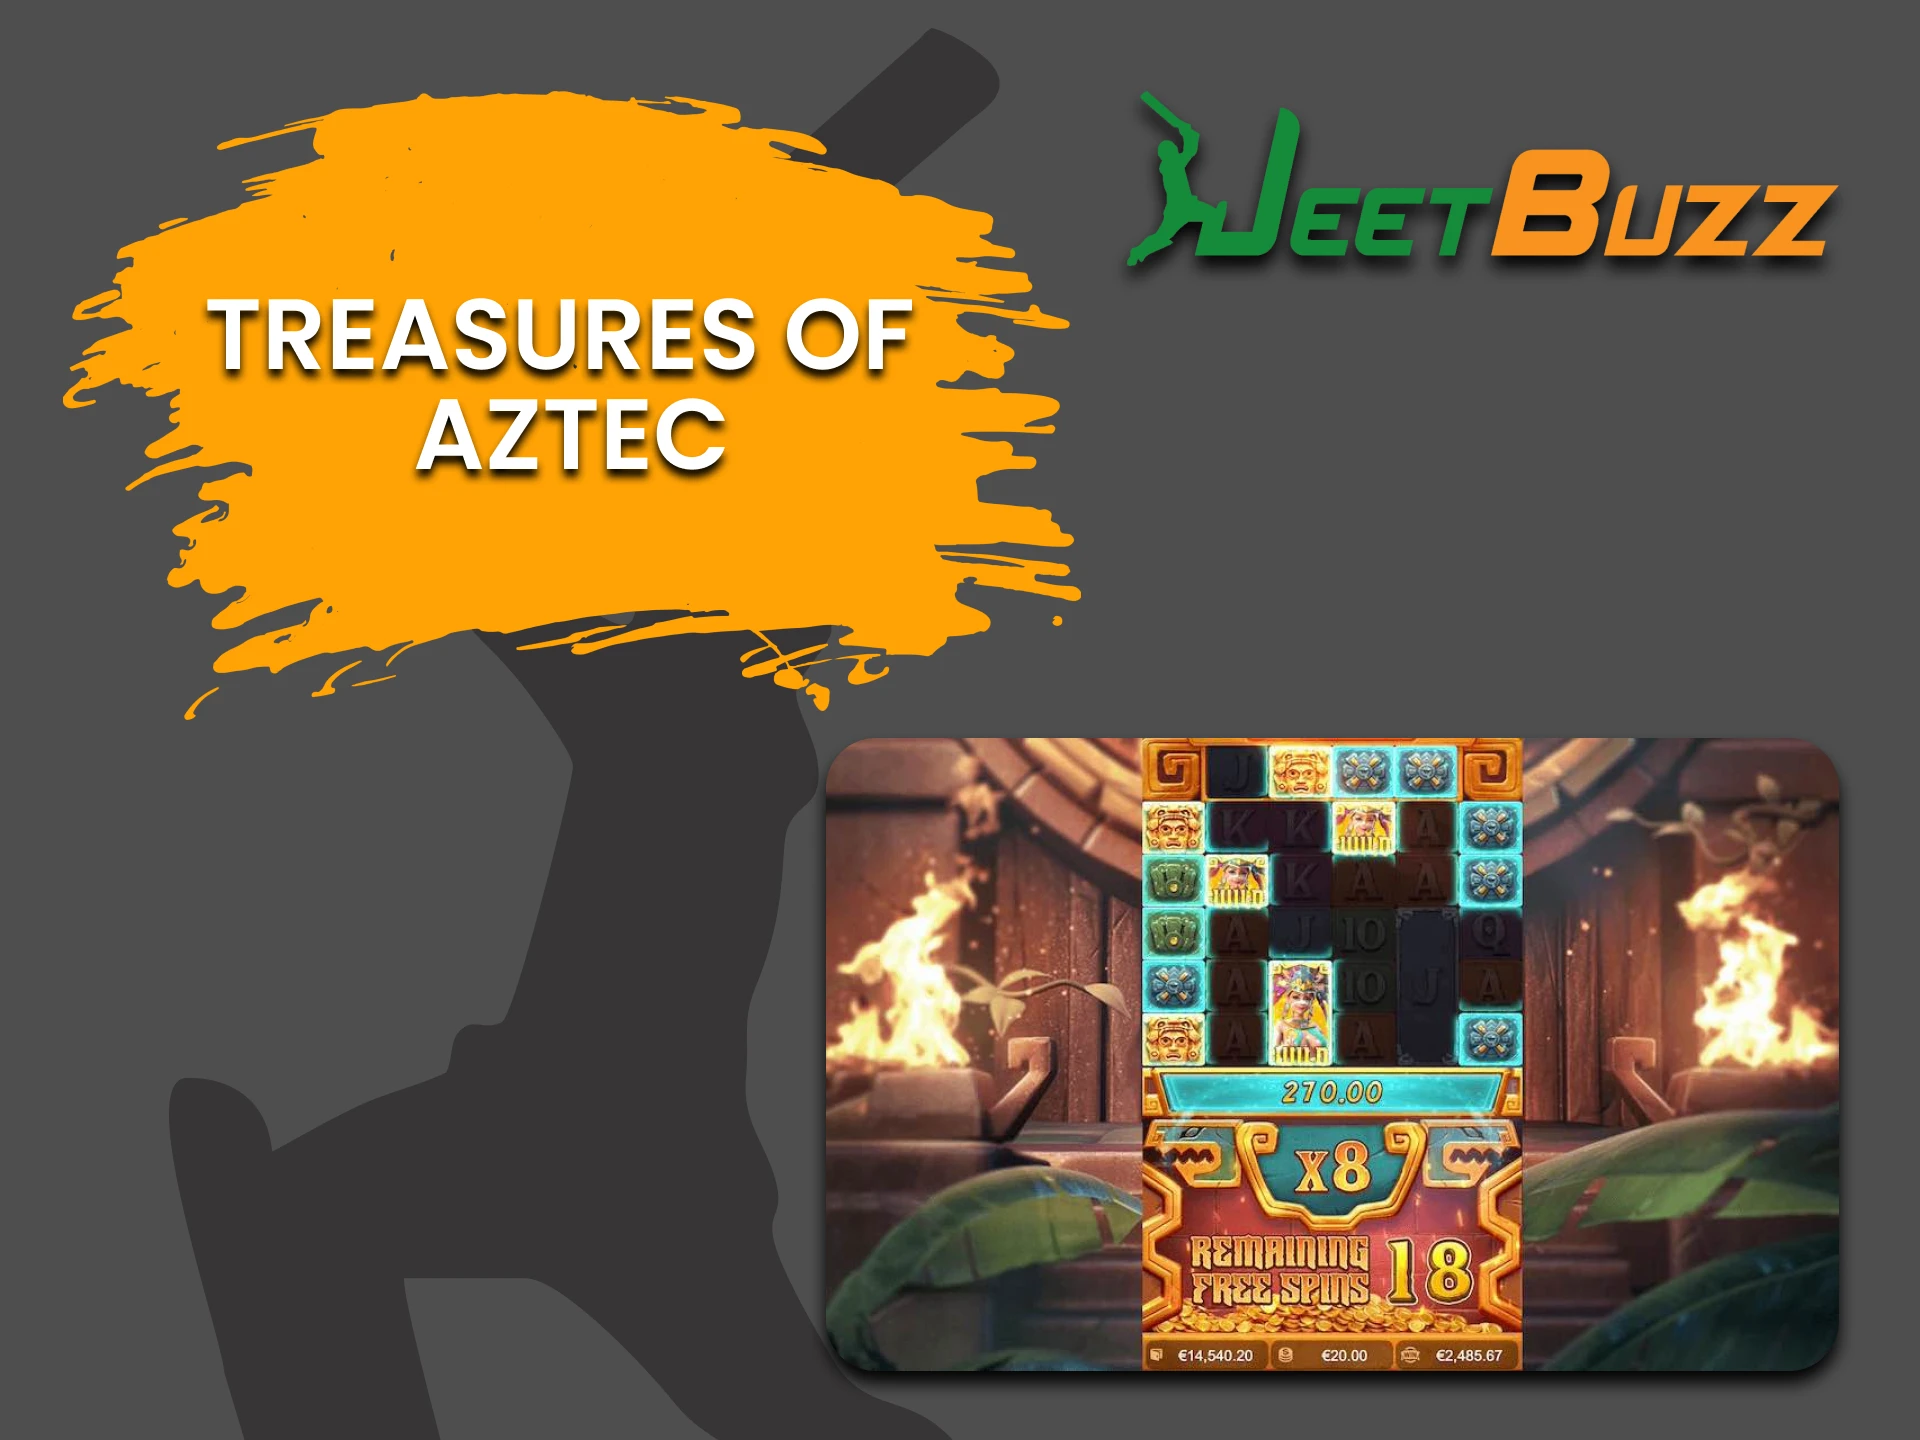 For games on JeetBuzz, choose Treasures of Aztec.